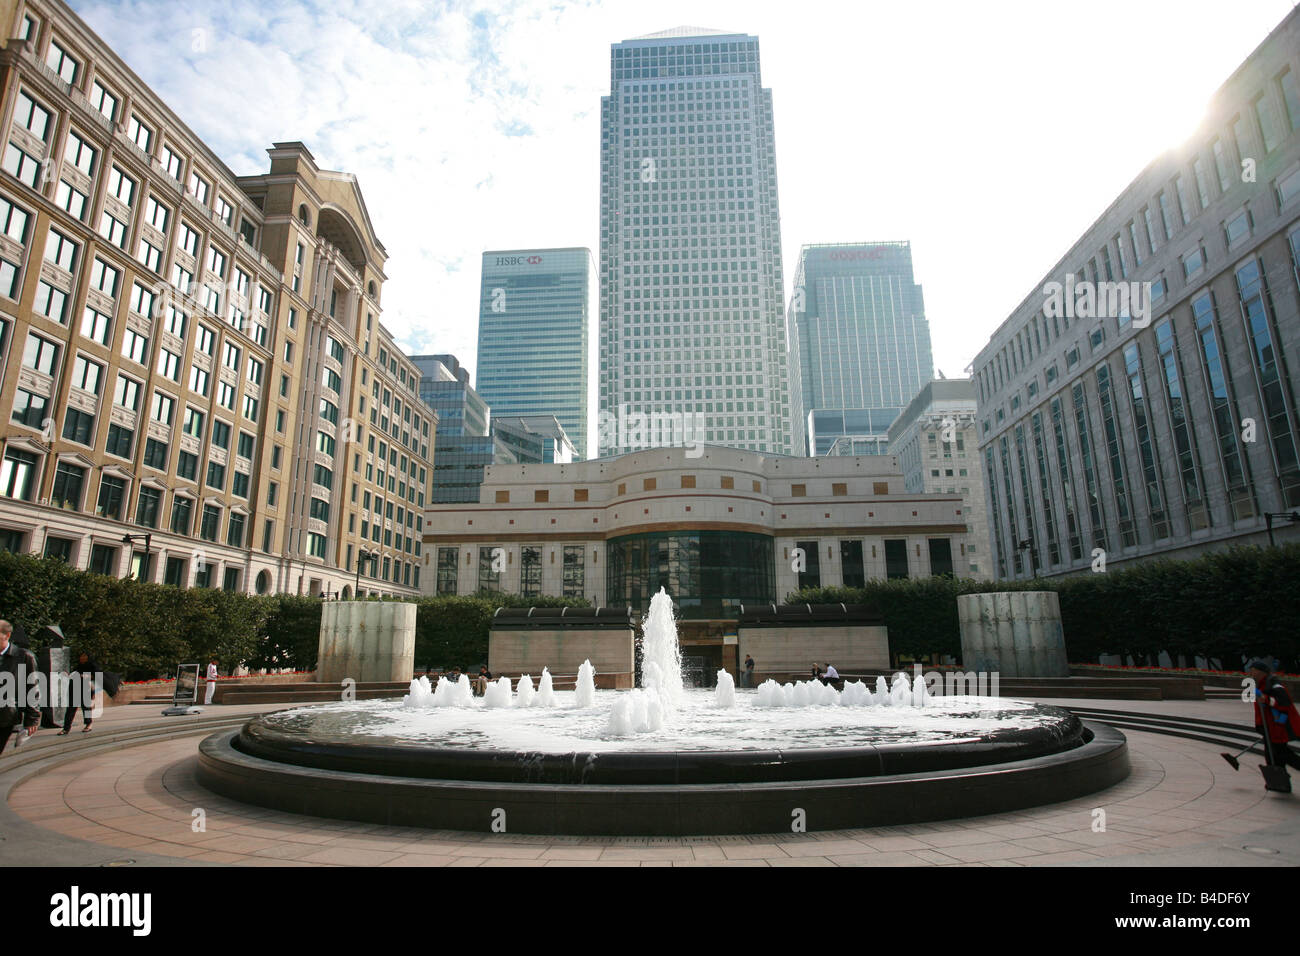 HSBC One Canada Square and Citigroup buildings from Cabot Square, Canary Wharf London Docklands UK banking head quarters area UK Stock Photo